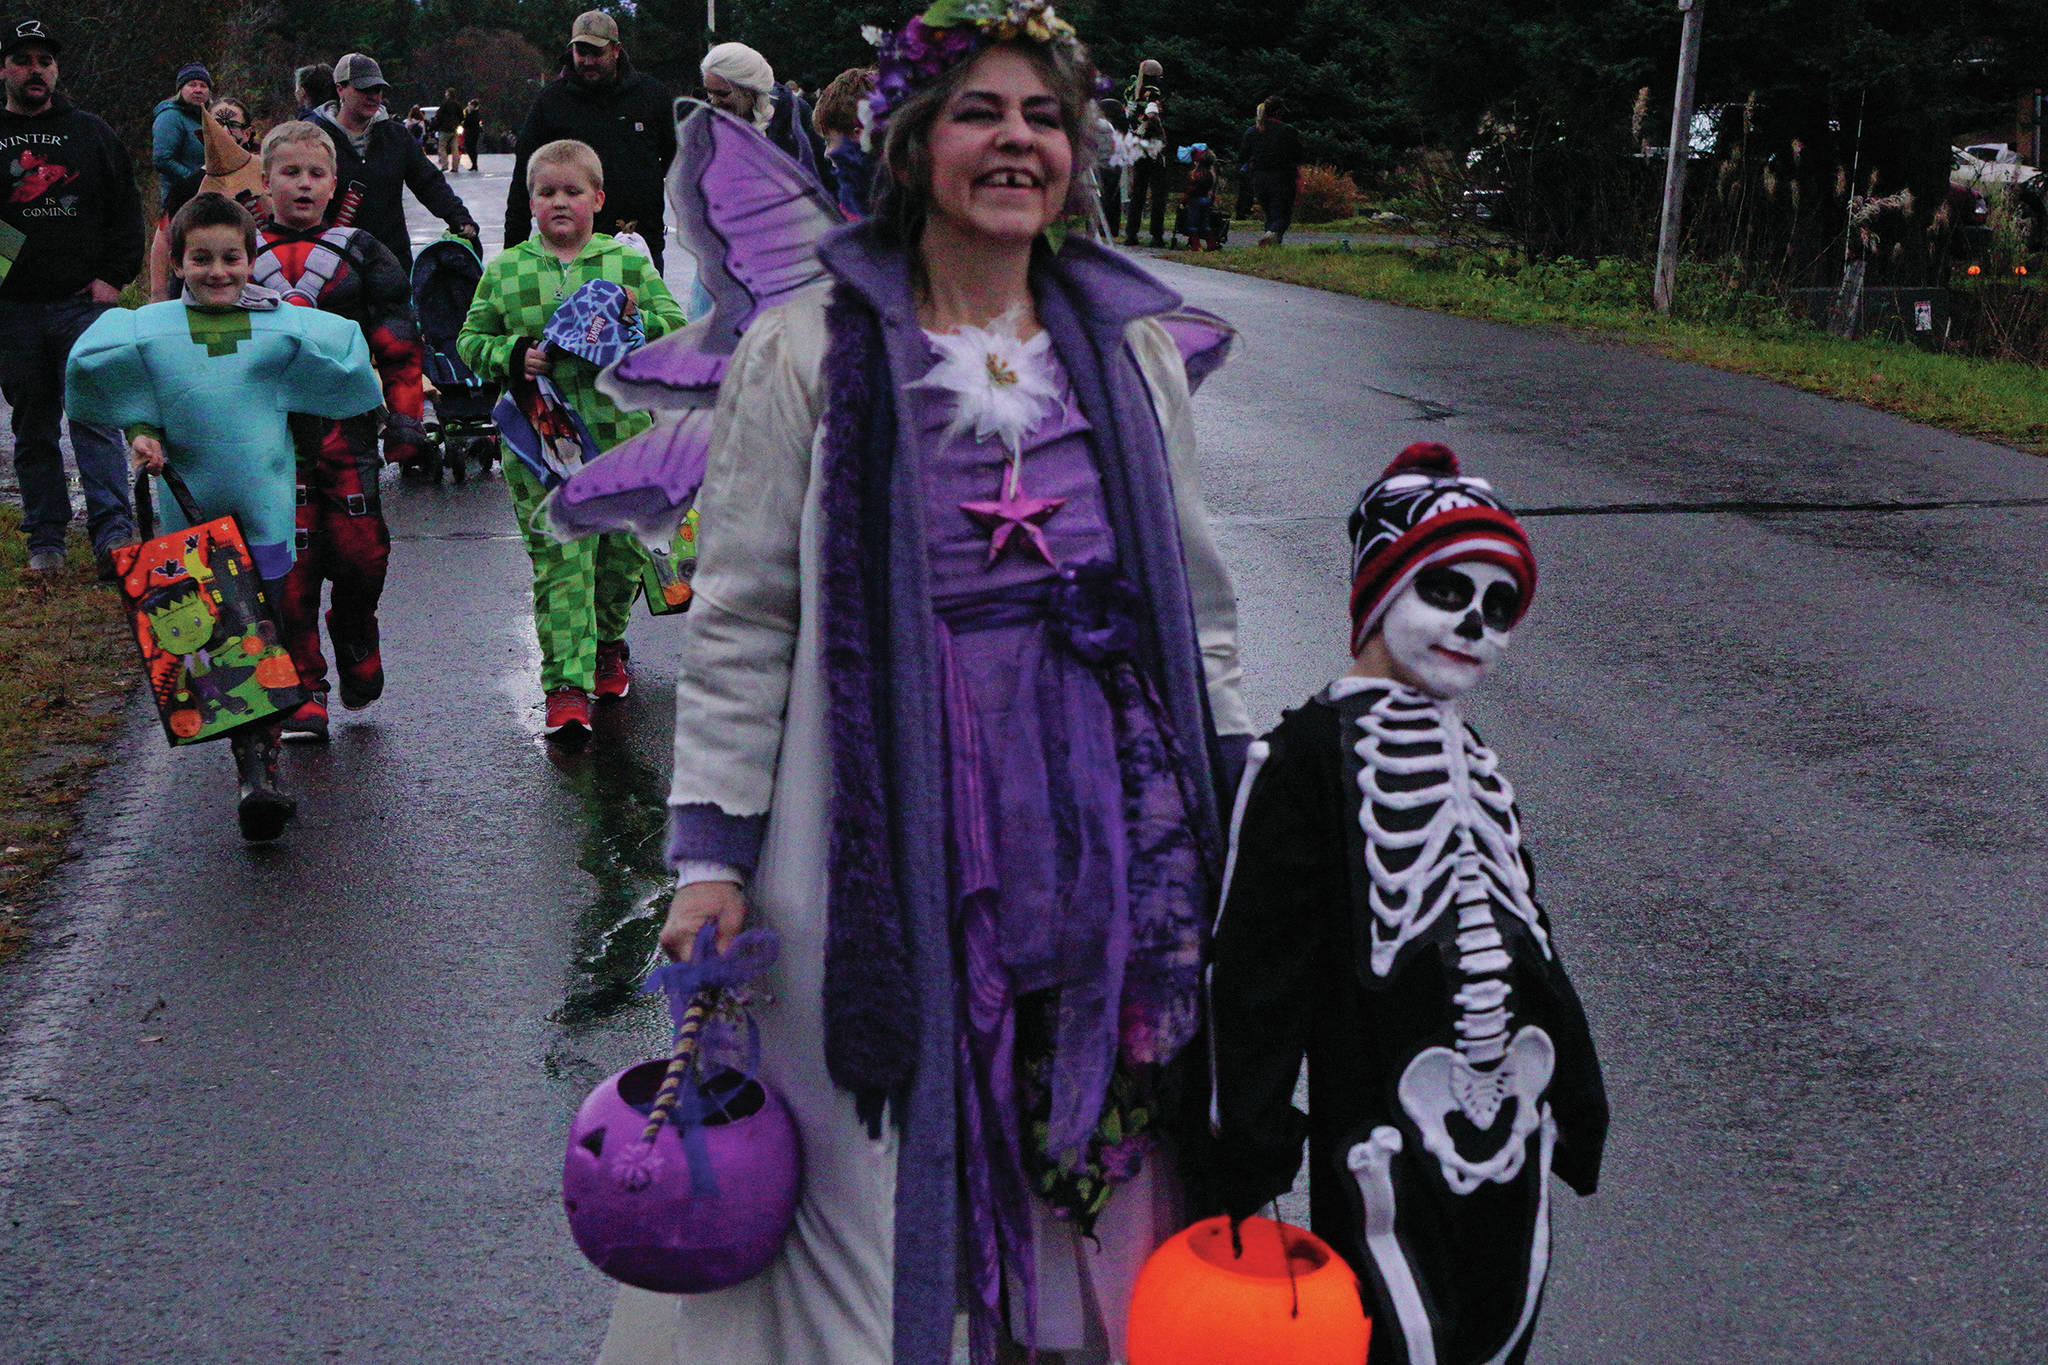 Tami Huston, left, and her granddaughter, Magle, are part of a group of Halloween trick-or-treaters walking down Bayview Avenue on Oct. 31, 2019, in Homer, Alaska. (Photo by Michael Armstrong/Homer News)